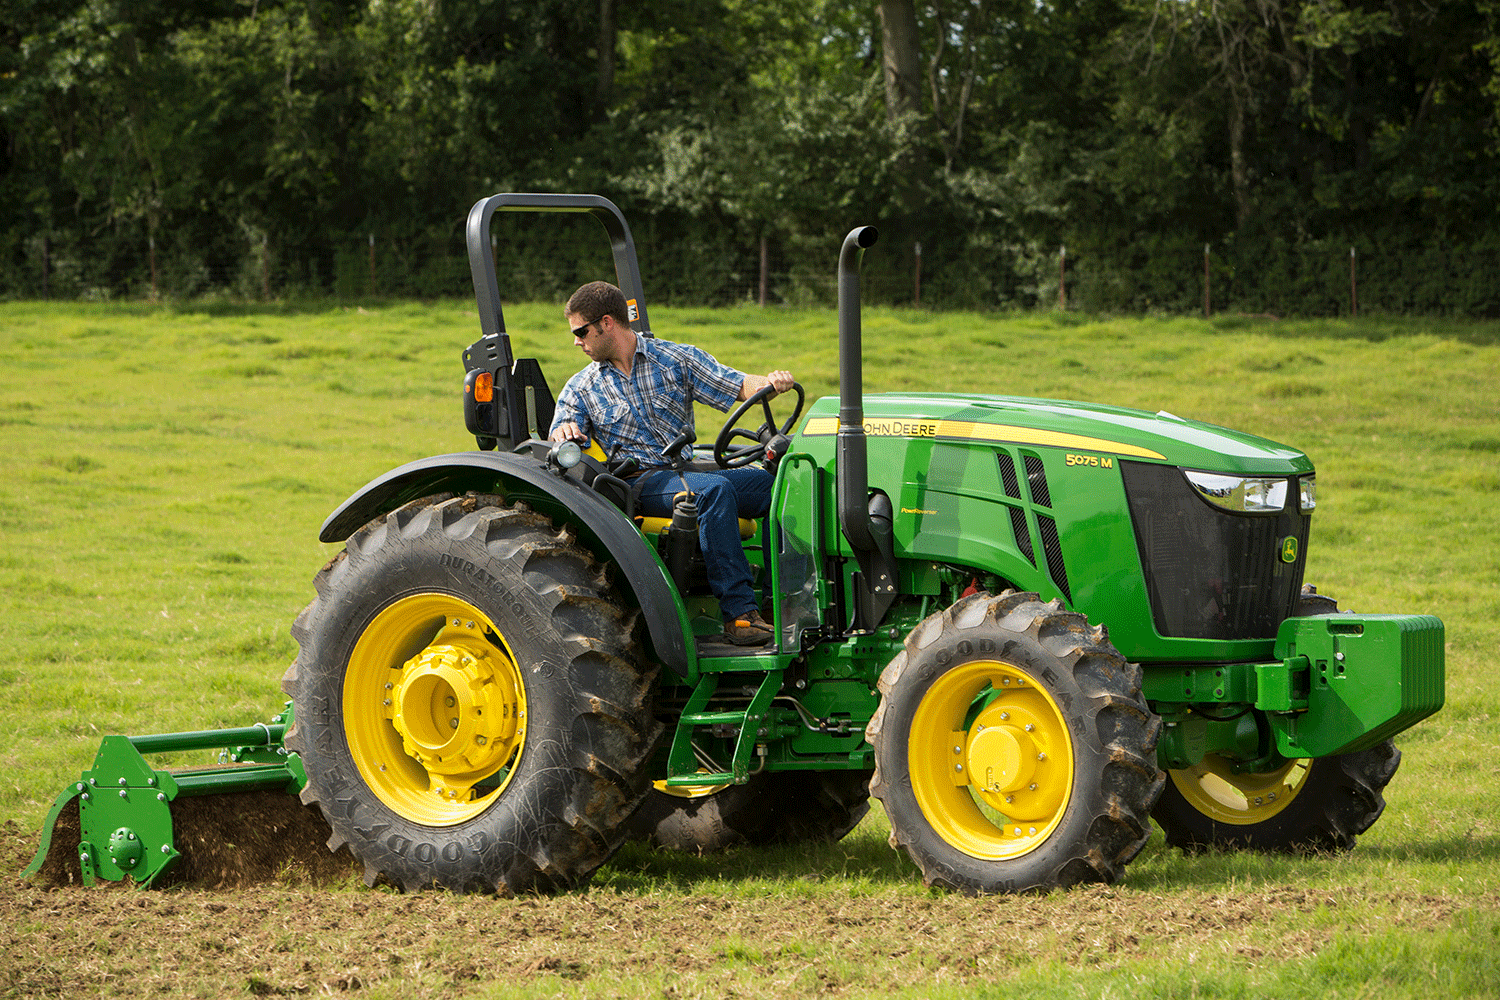 5M Utility Tractors Pulling up the Curtain on the New Line of 2015 John Deere Products